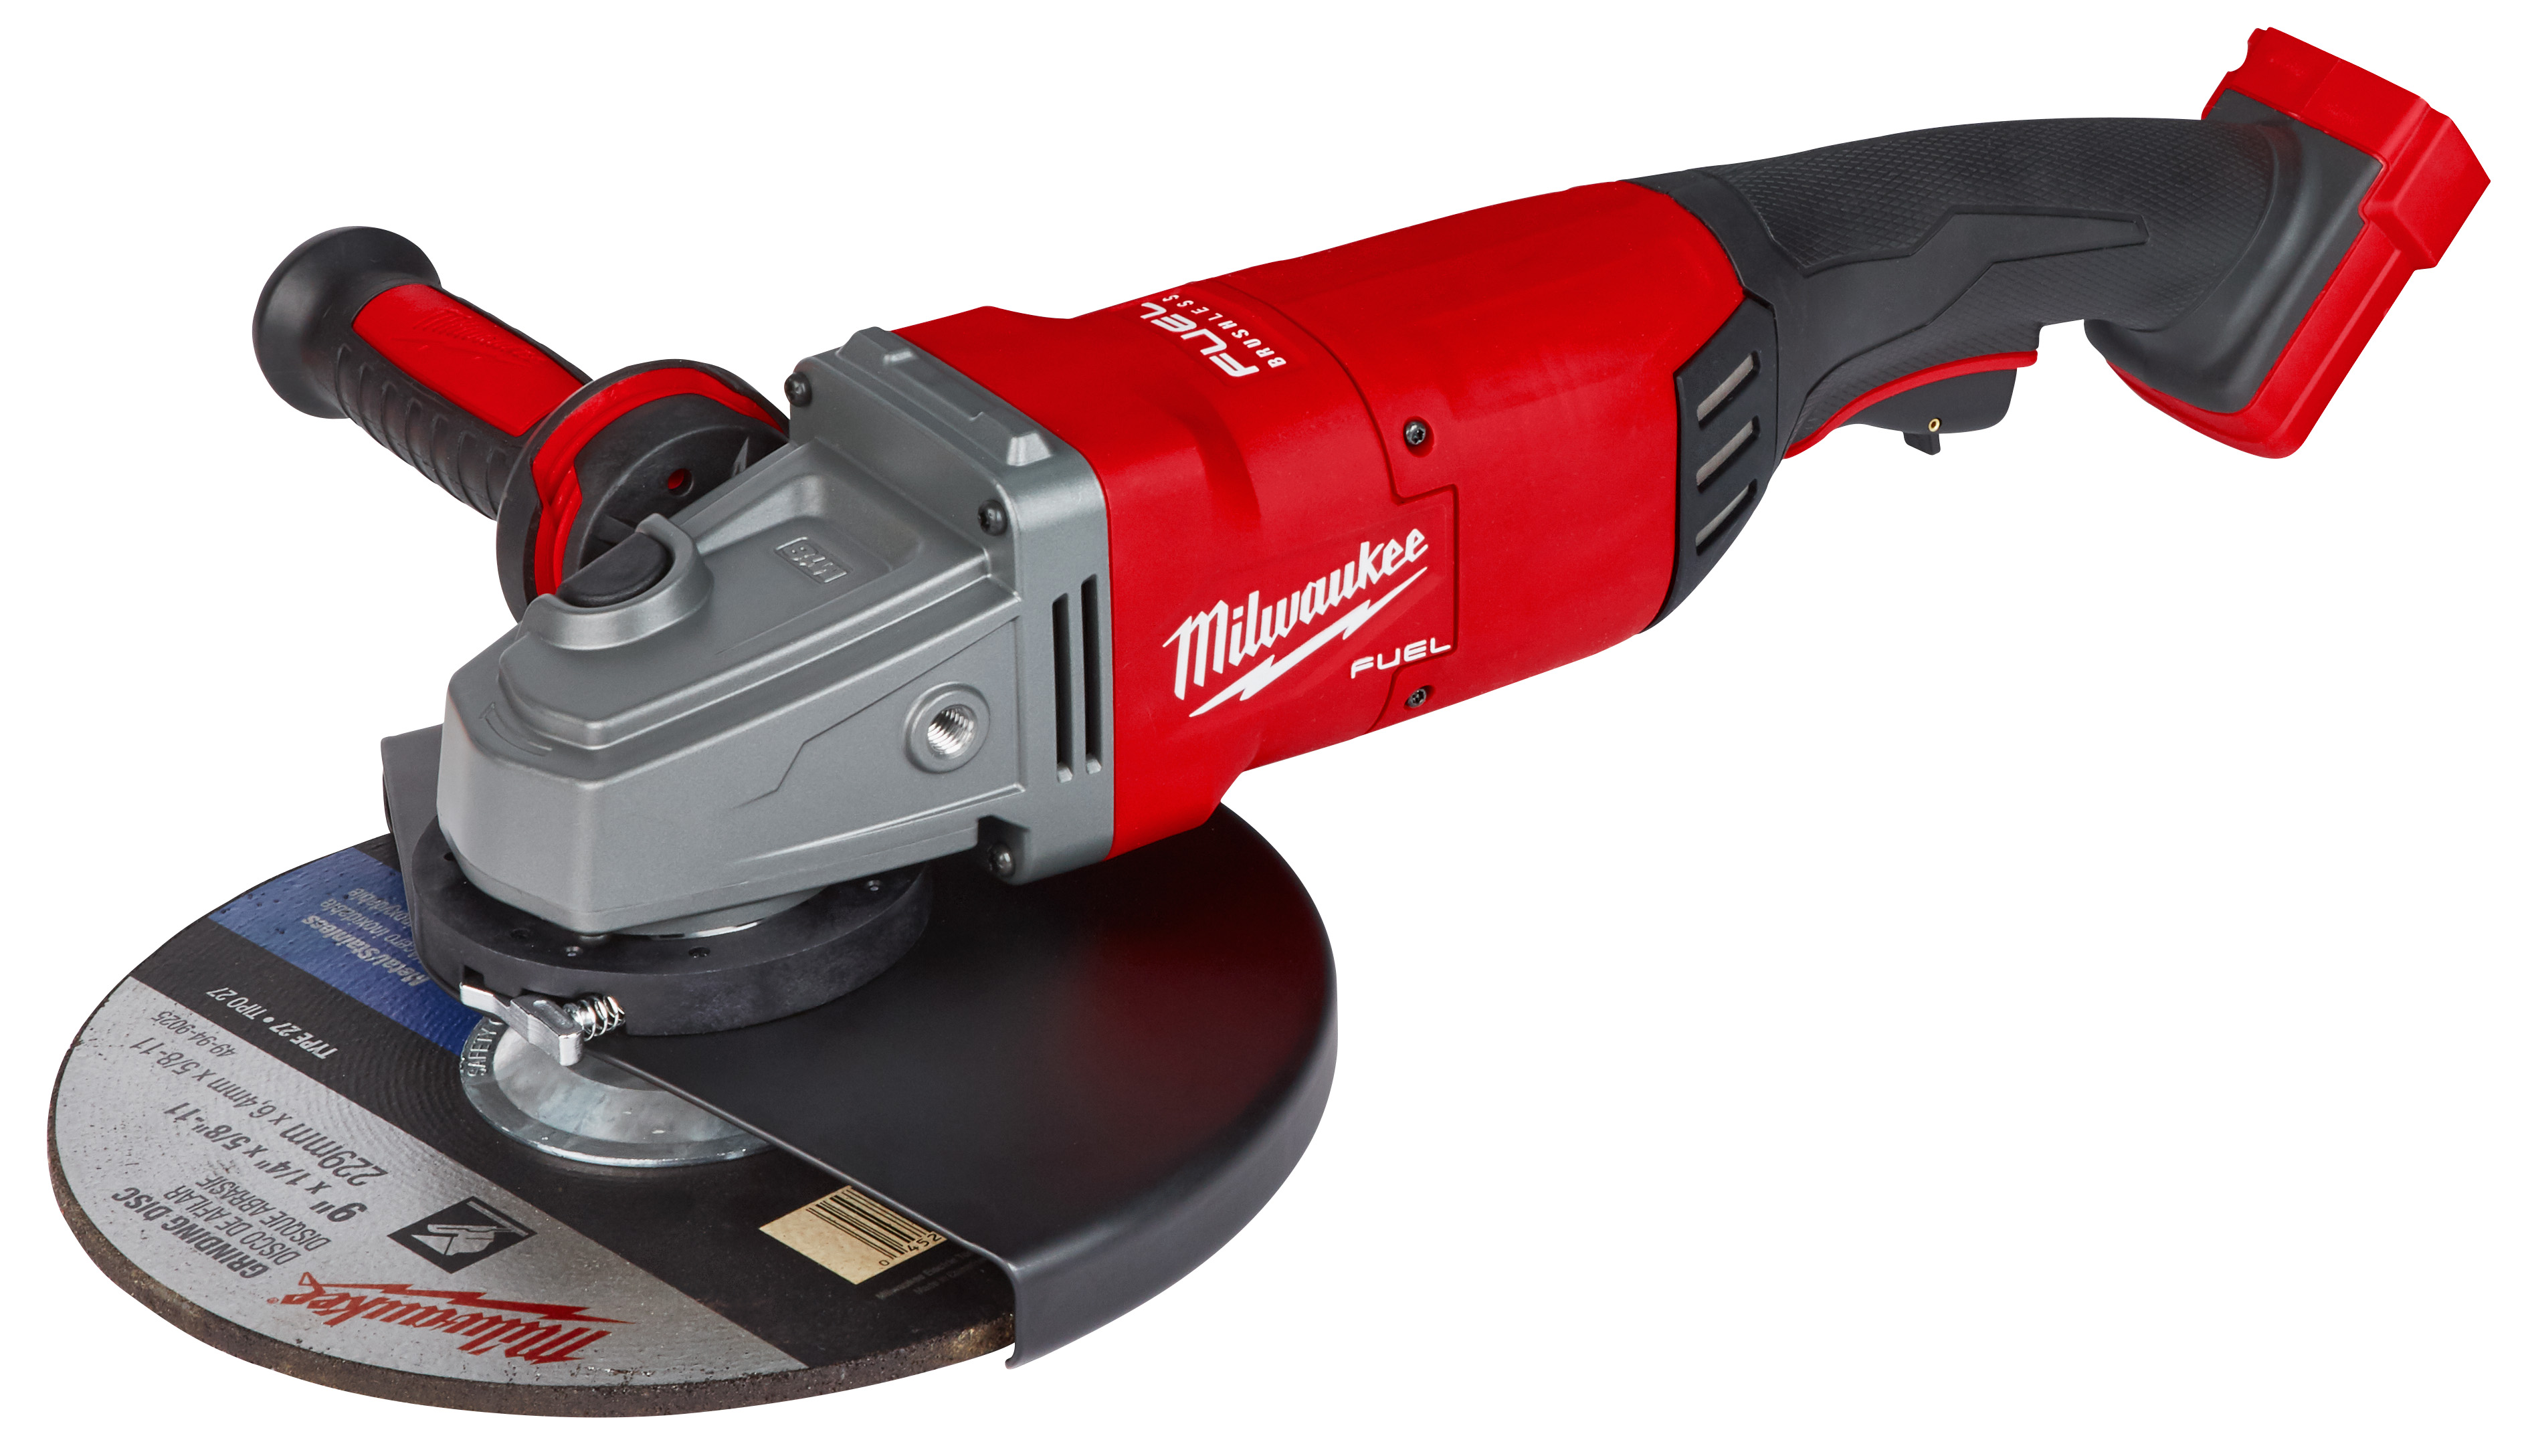 M18 FUEL 18 Volt Lithium-Ion Brushless Cordless 7/9 in. Angle Grinder  - Tool Only